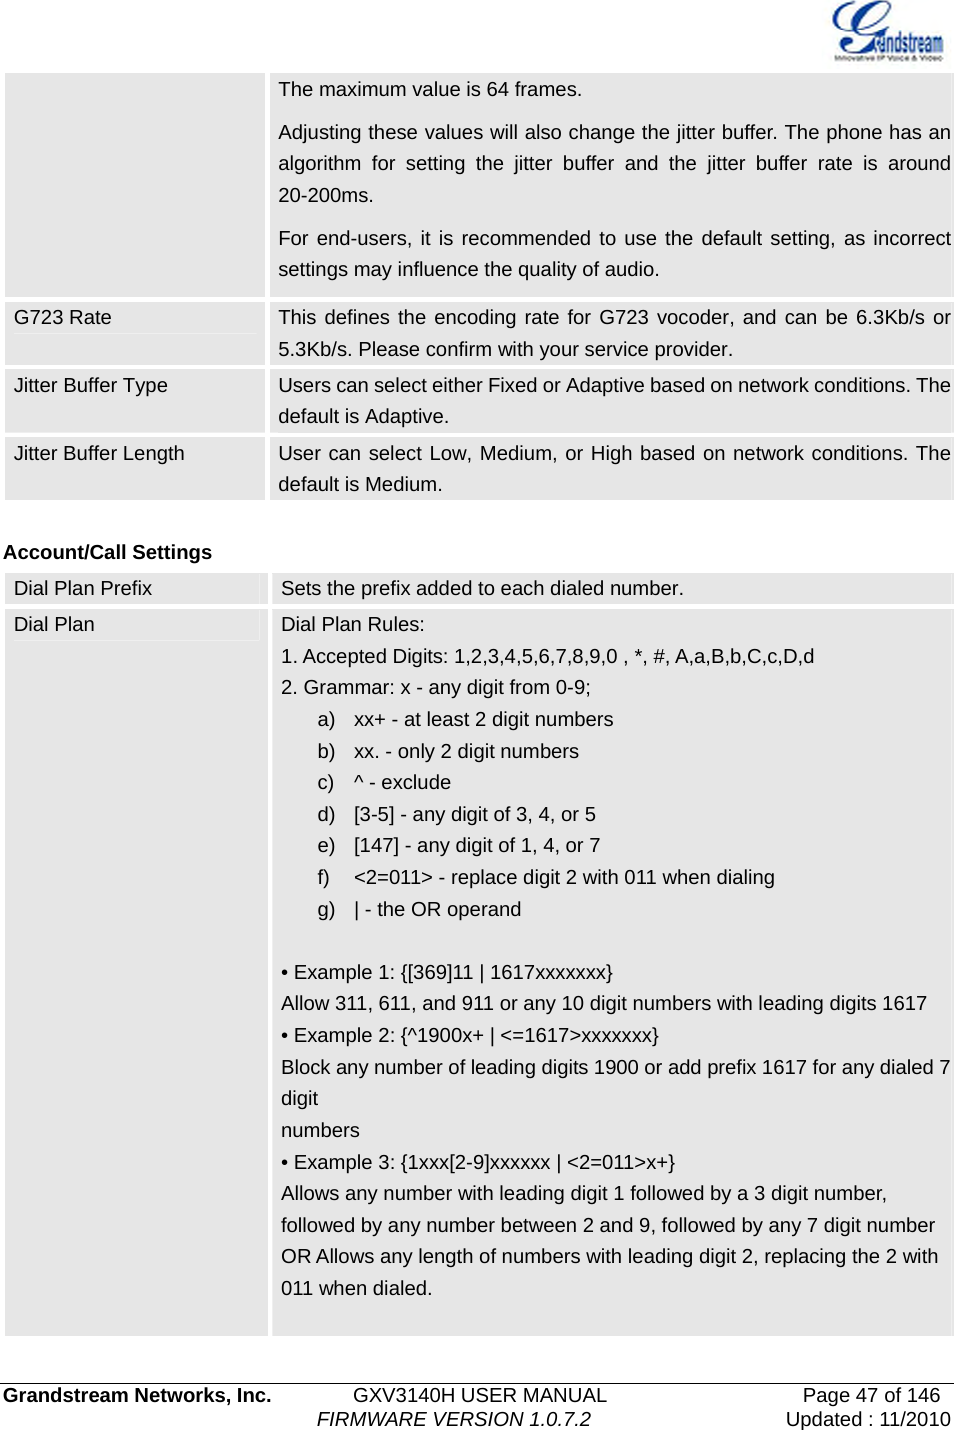   Grandstream Networks, Inc.        GXV3140H USER MANUAL                  Page 47 of 146                                FIRMWARE VERSION 1.0.7.2 Updated : 11/2010  The maximum value is 64 frames. Adjusting these values will also change the jitter buffer. The phone has an algorithm for setting the jitter buffer and the jitter buffer rate is around 20-200ms.  For end-users, it is recommended to use the default setting, as incorrect settings may influence the quality of audio. G723 Rate  This defines the encoding rate for G723 vocoder, and can be 6.3Kb/s or 5.3Kb/s. Please confirm with your service provider.   Jitter Buffer Type  Users can select either Fixed or Adaptive based on network conditions. The default is Adaptive. Jitter Buffer Length  User can select Low, Medium, or High based on network conditions. The default is Medium.  Account/Call Settings Dial Plan Prefix  Sets the prefix added to each dialed number. Dial Plan  Dial Plan Rules: 1. Accepted Digits: 1,2,3,4,5,6,7,8,9,0 , *, #, A,a,B,b,C,c,D,d 2. Grammar: x - any digit from 0-9; a)  xx+ - at least 2 digit numbers b)  xx. - only 2 digit numbers c) ^ - exclude d)  [3-5] - any digit of 3, 4, or 5 e)  [147] - any digit of 1, 4, or 7 f)  &lt;2=011&gt; - replace digit 2 with 011 when dialing g)  | - the OR operand  • Example 1: {[369]11 | 1617xxxxxxx} Allow 311, 611, and 911 or any 10 digit numbers with leading digits 1617 • Example 2: {^1900x+ | &lt;=1617&gt;xxxxxxx} Block any number of leading digits 1900 or add prefix 1617 for any dialed 7 digit numbers • Example 3: {1xxx[2-9]xxxxxx | &lt;2=011&gt;x+} Allows any number with leading digit 1 followed by a 3 digit number, followed by any number between 2 and 9, followed by any 7 digit number OR Allows any length of numbers with leading digit 2, replacing the 2 with 011 when dialed.  